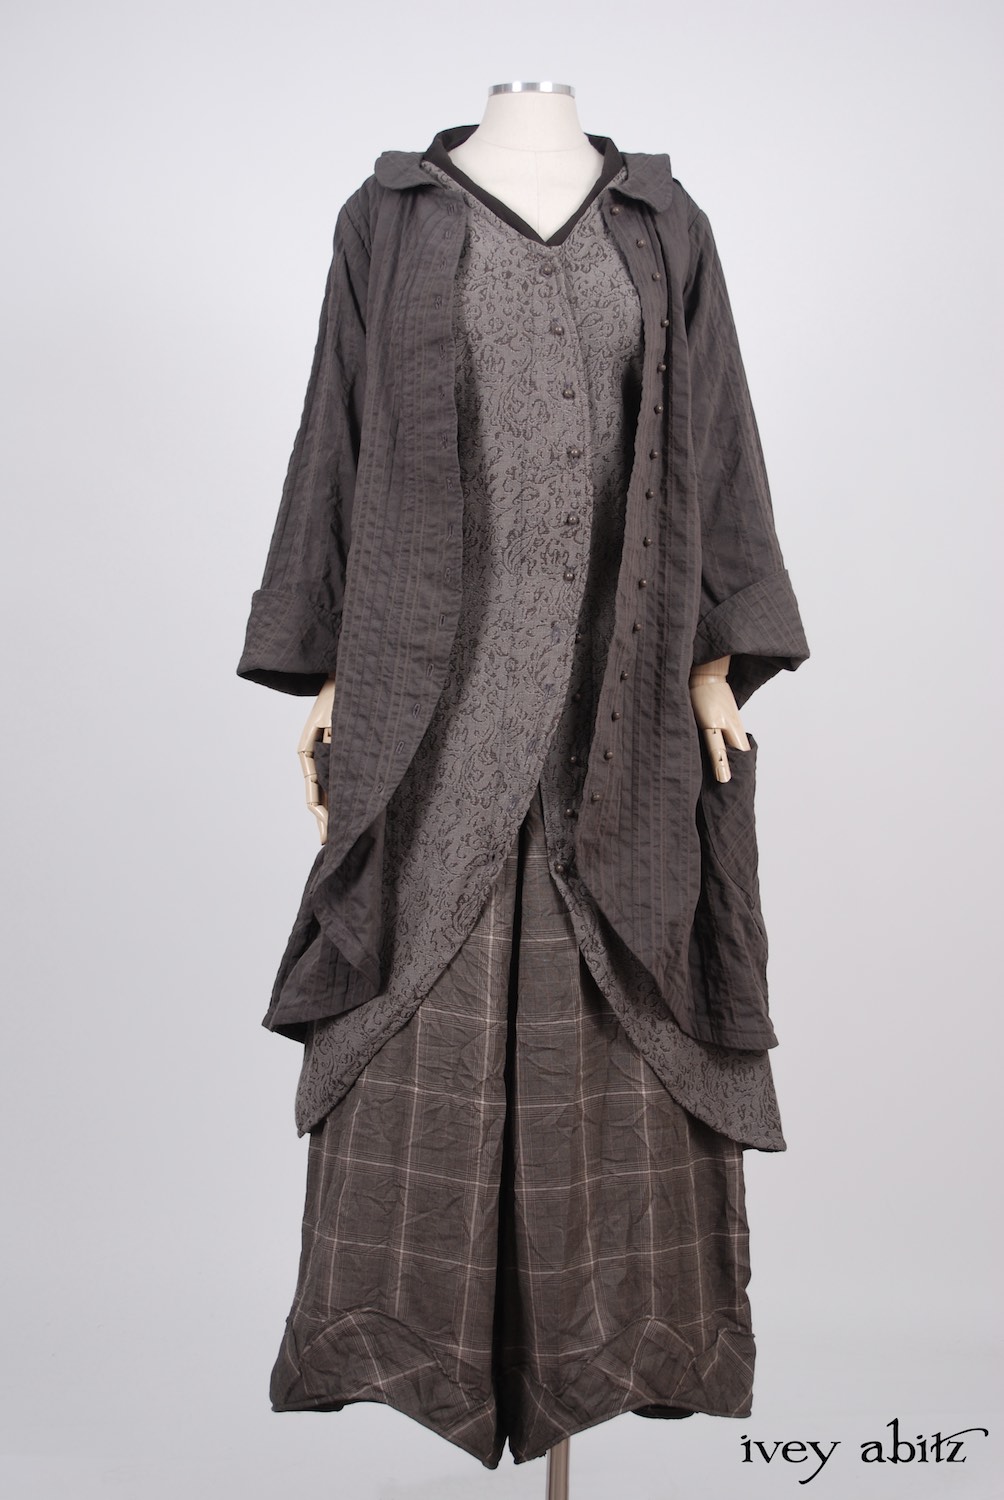 Ivey Abitz - Arthur Hill Jacket in Feather Textured Striped Cotton  - Arthur Hill Frock in Feather Vine Weave  - Clotaire Sash in Feather Brown Crepe Voile  - Grasmere Trousers in Feather Brown Crushed Plaid Weave, Low Water Length